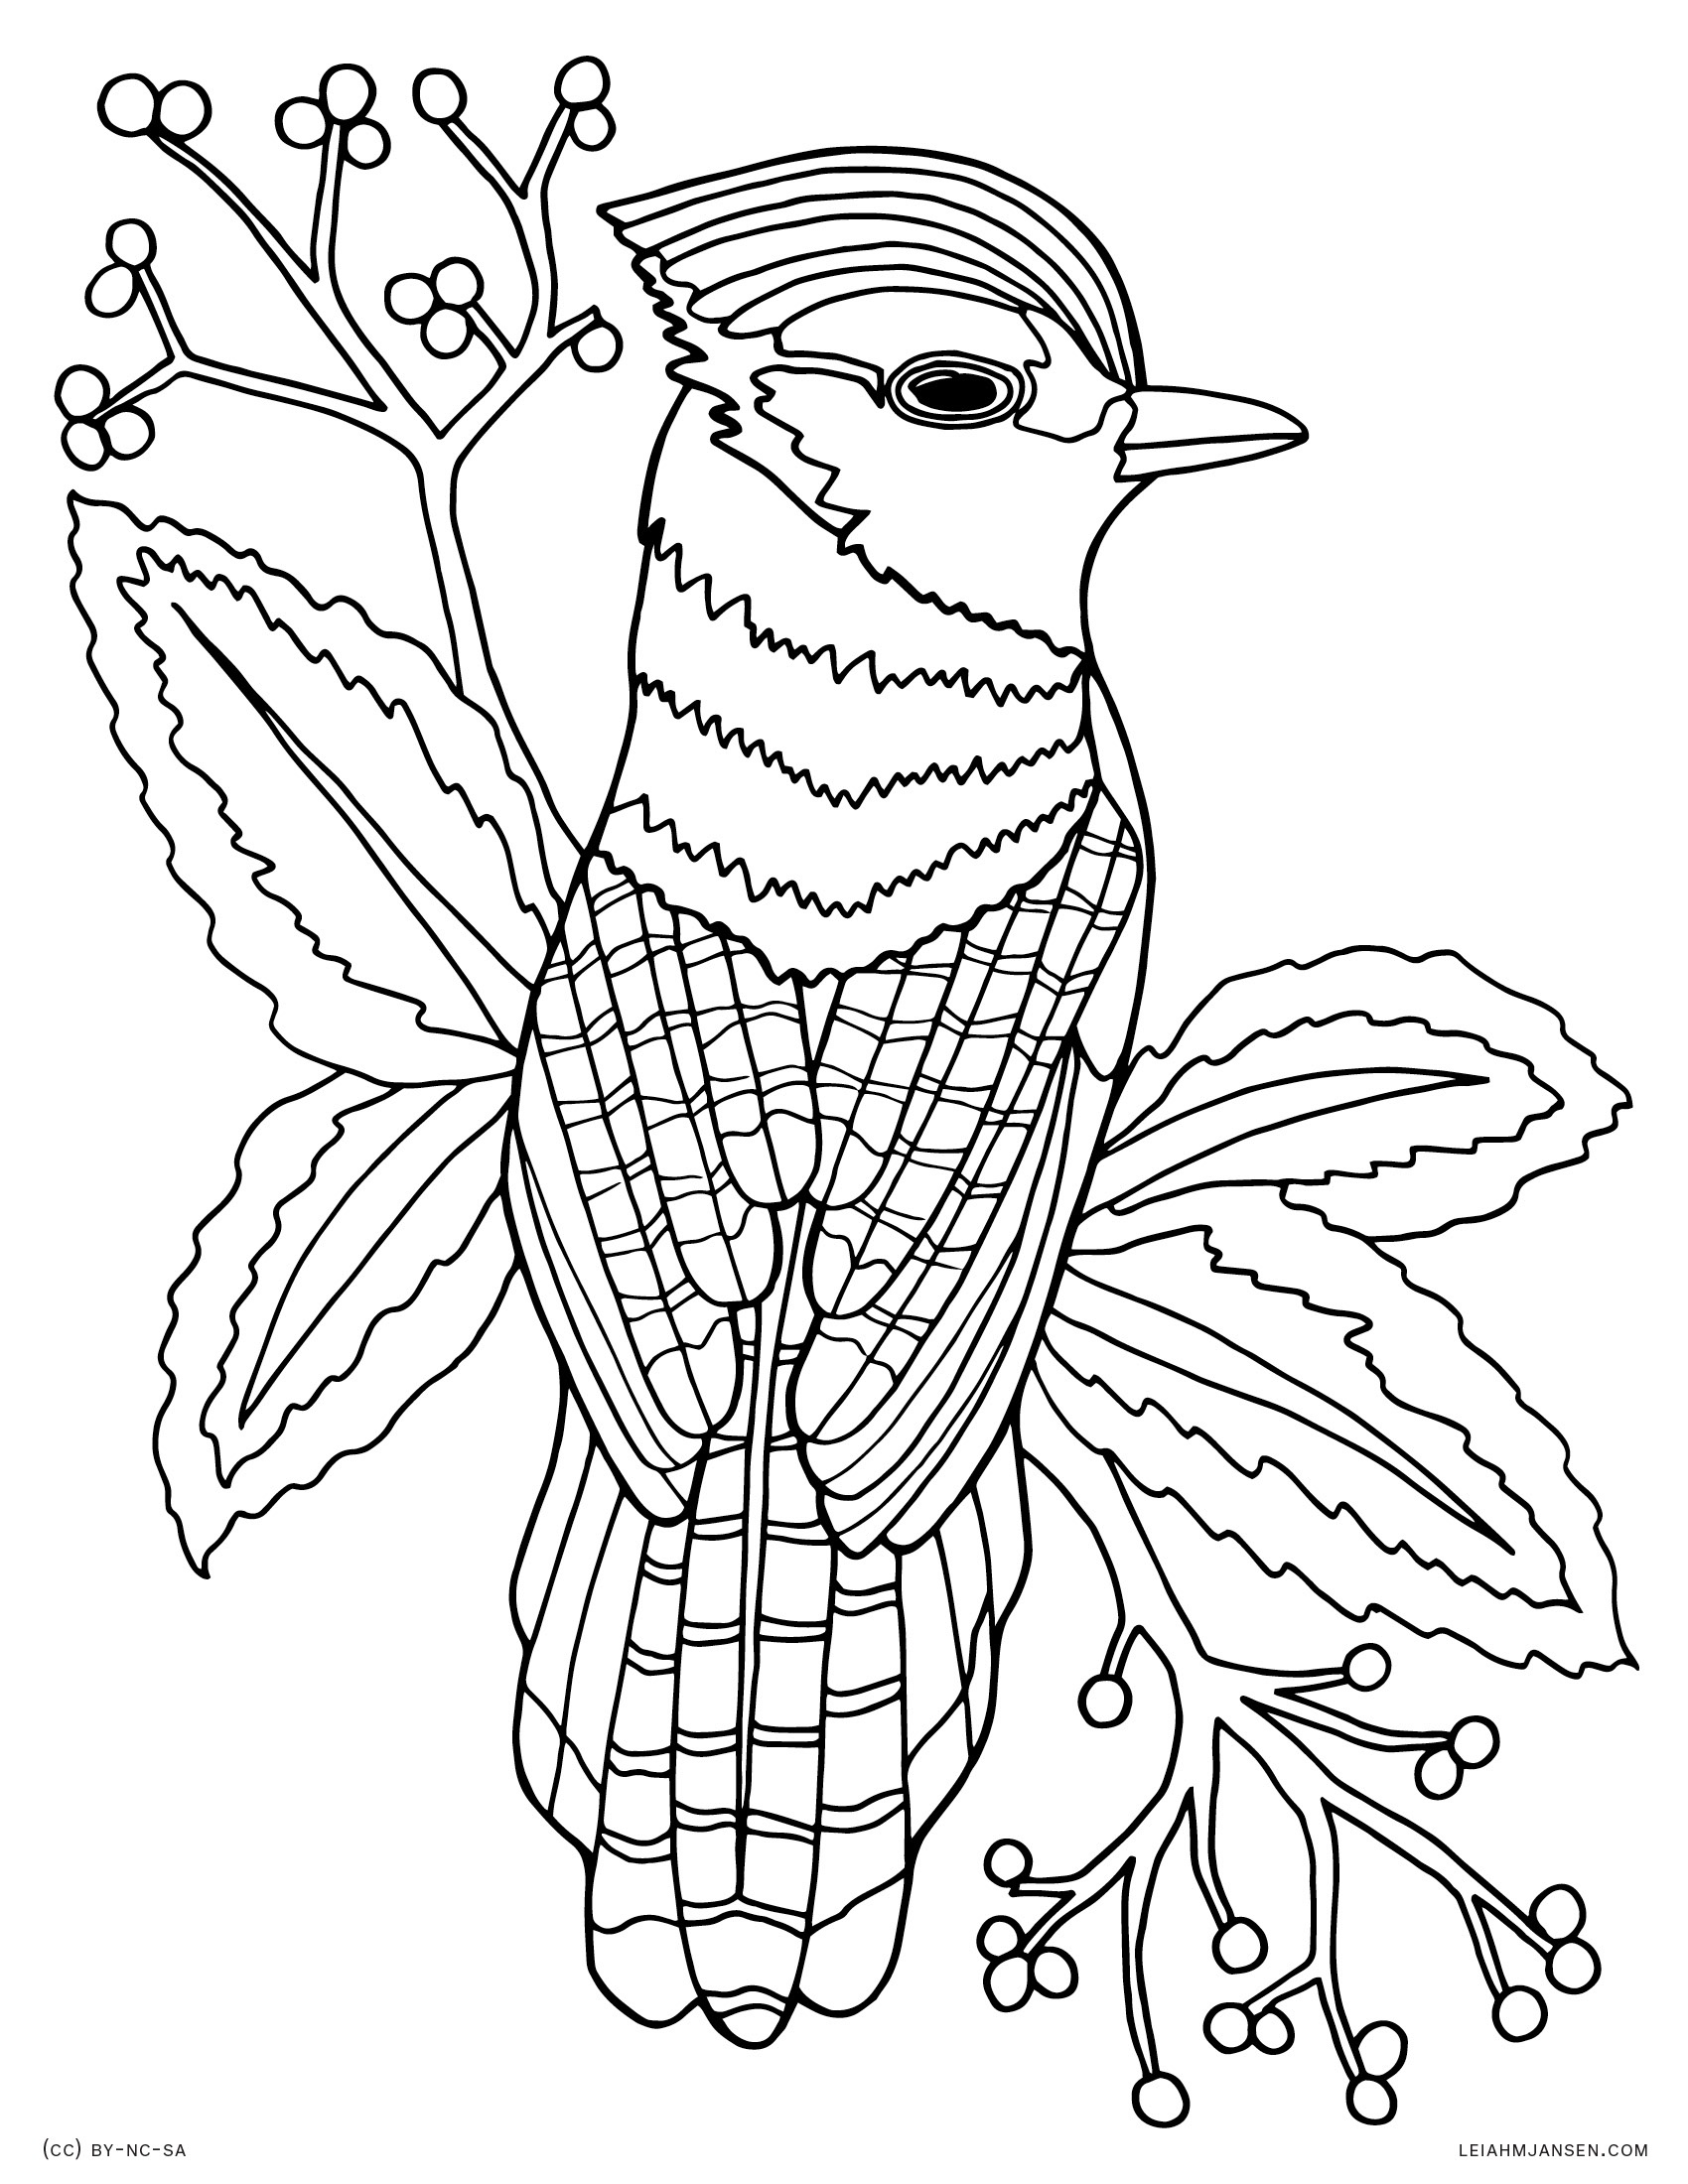 Coloring Pages - Free Printable Coloring Books For Adults